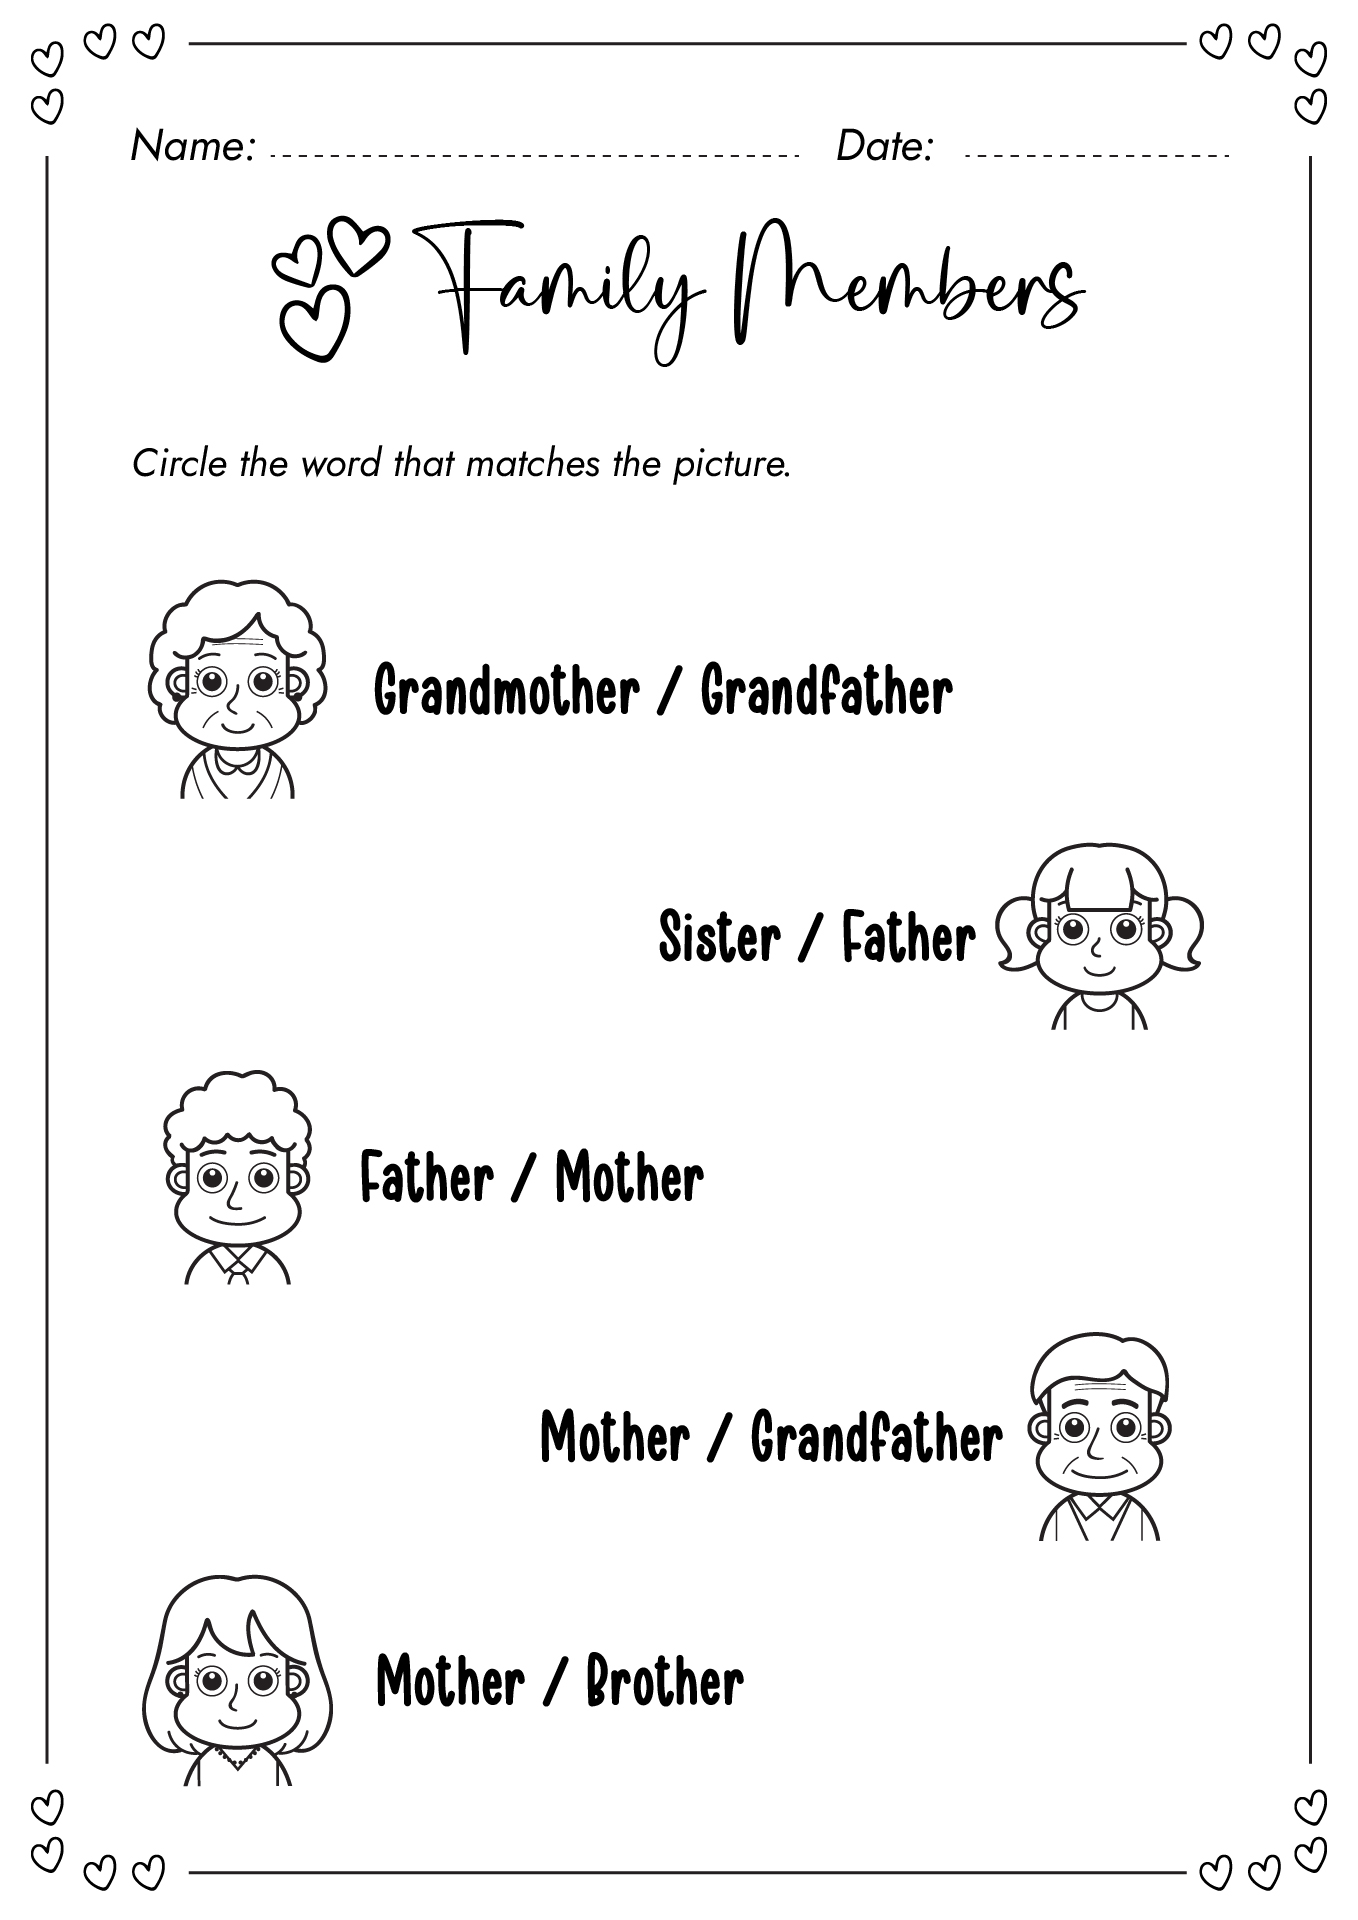 11-best-images-of-spanish-family-members-worksheet-french-family-worksheet-spanish-family